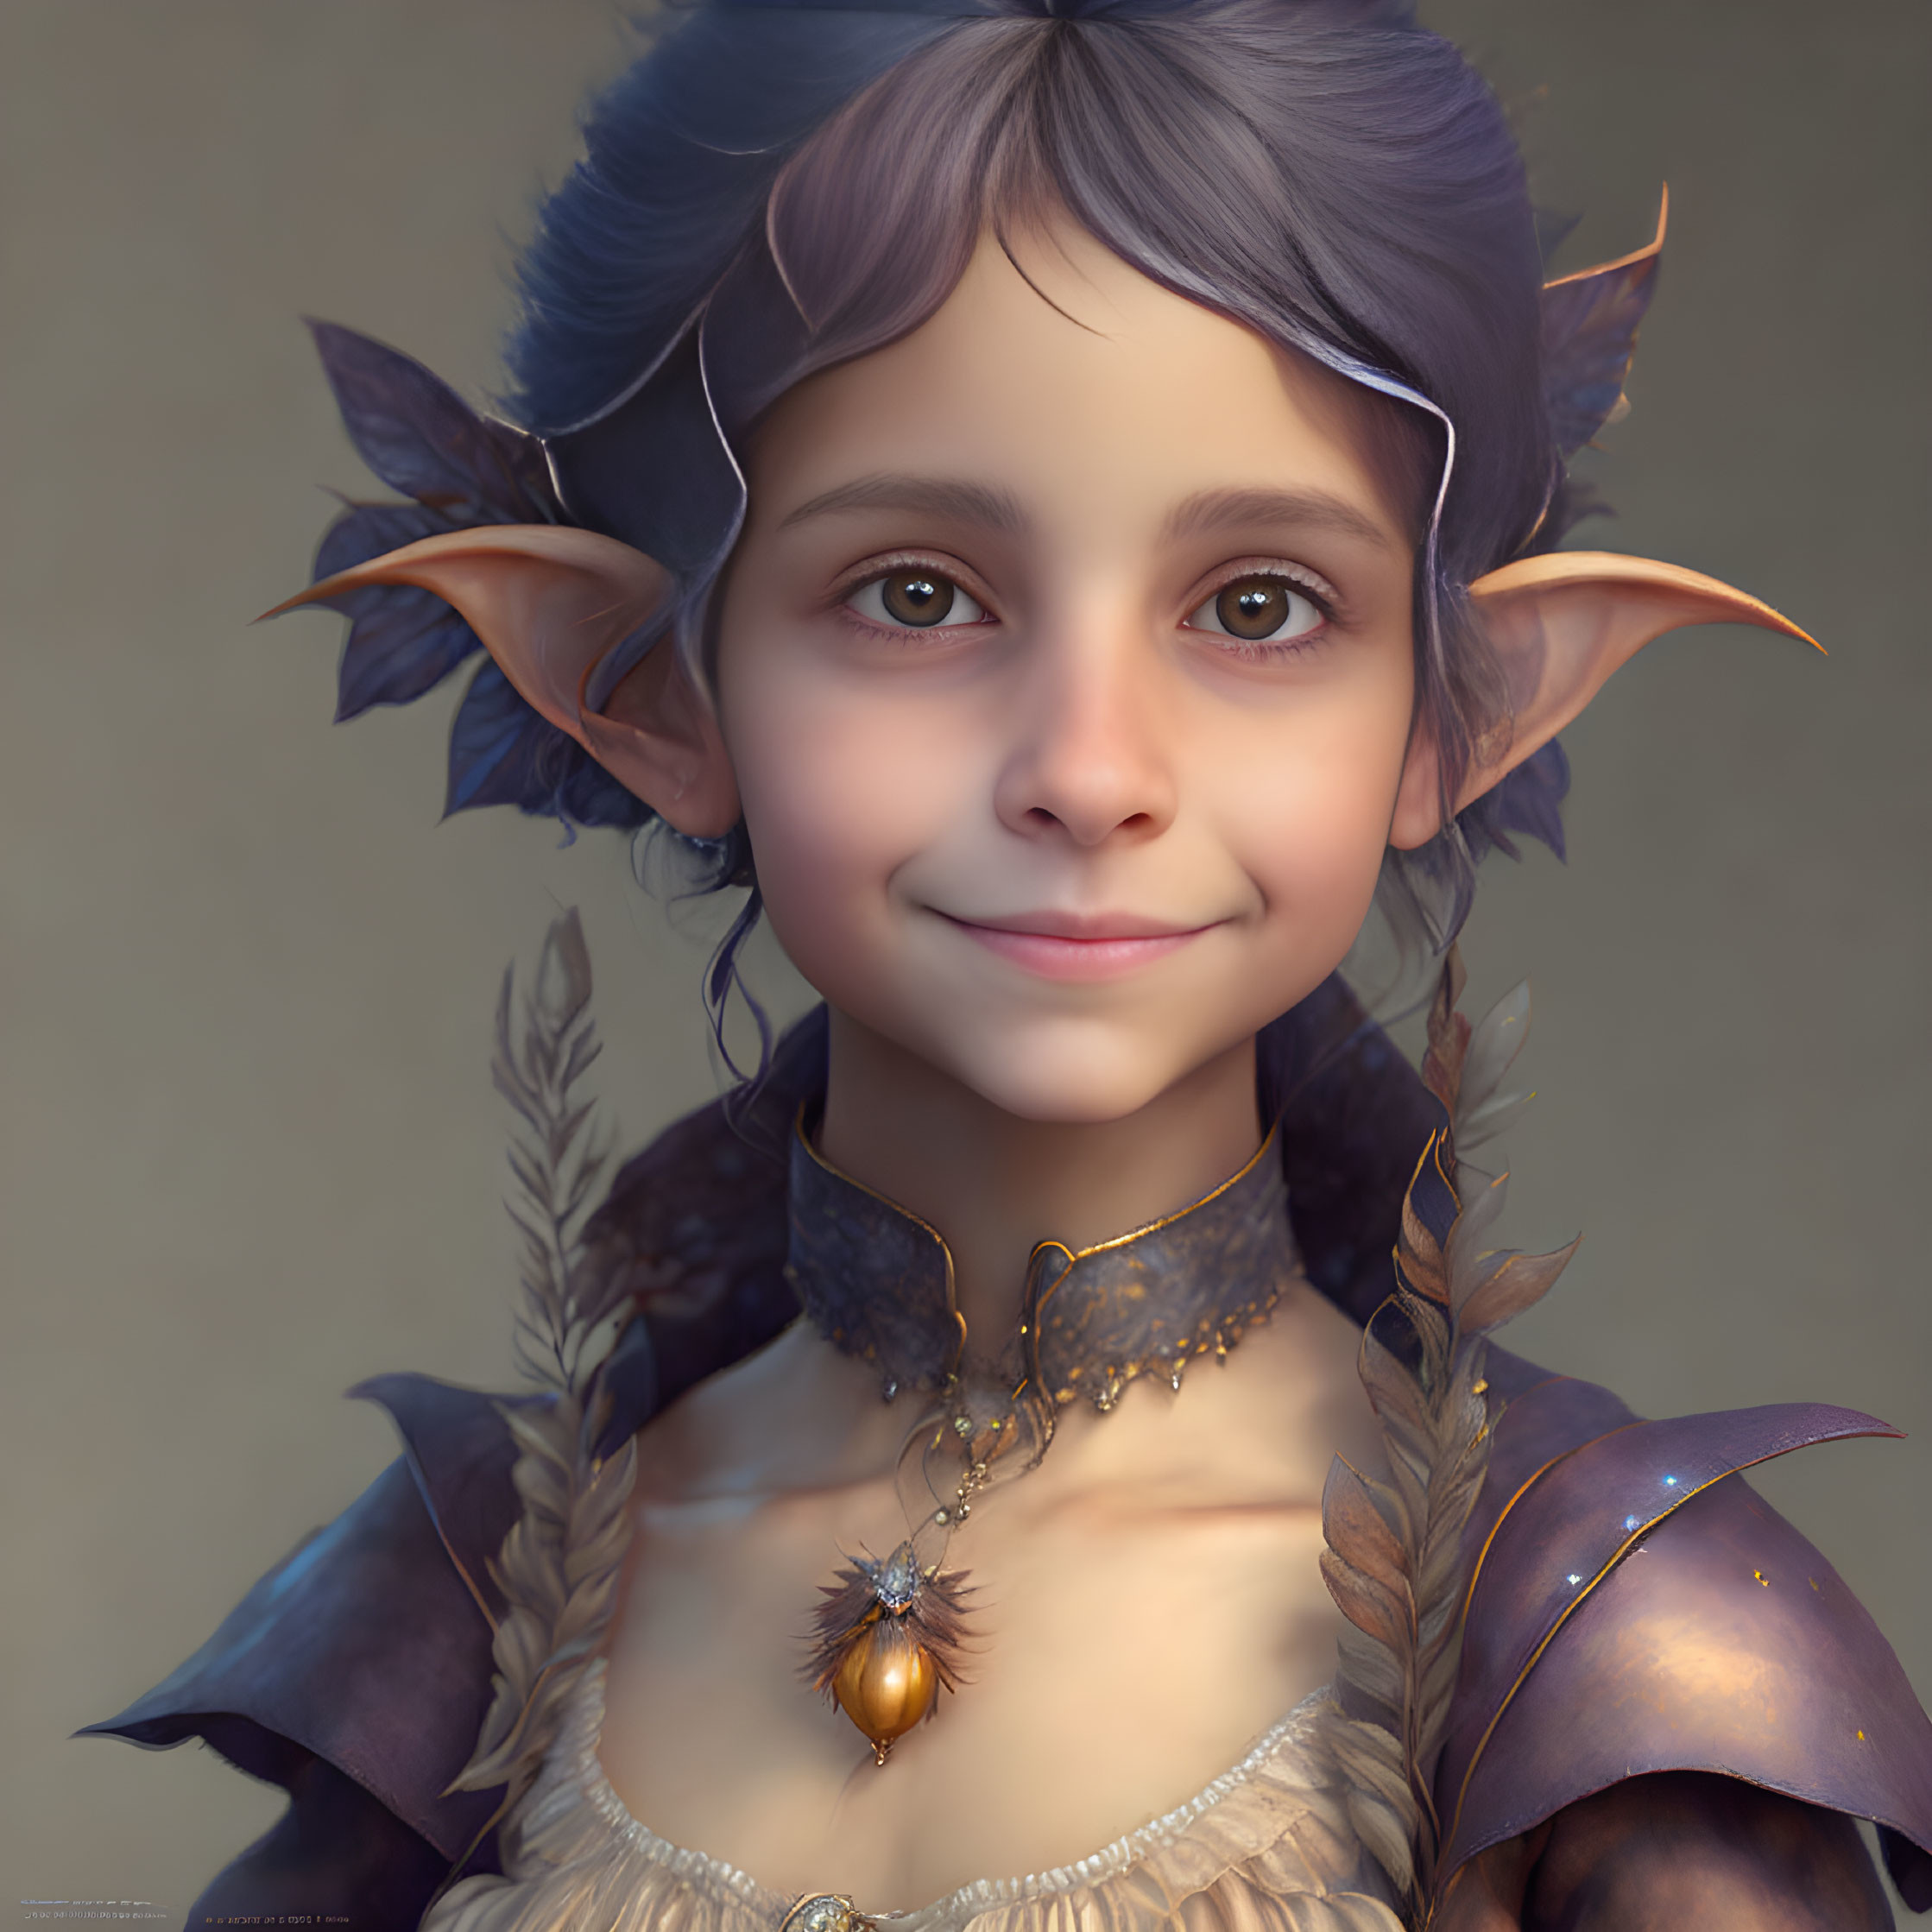 Fantasy-style digital art portrait of young character with purple hair and ornate armor